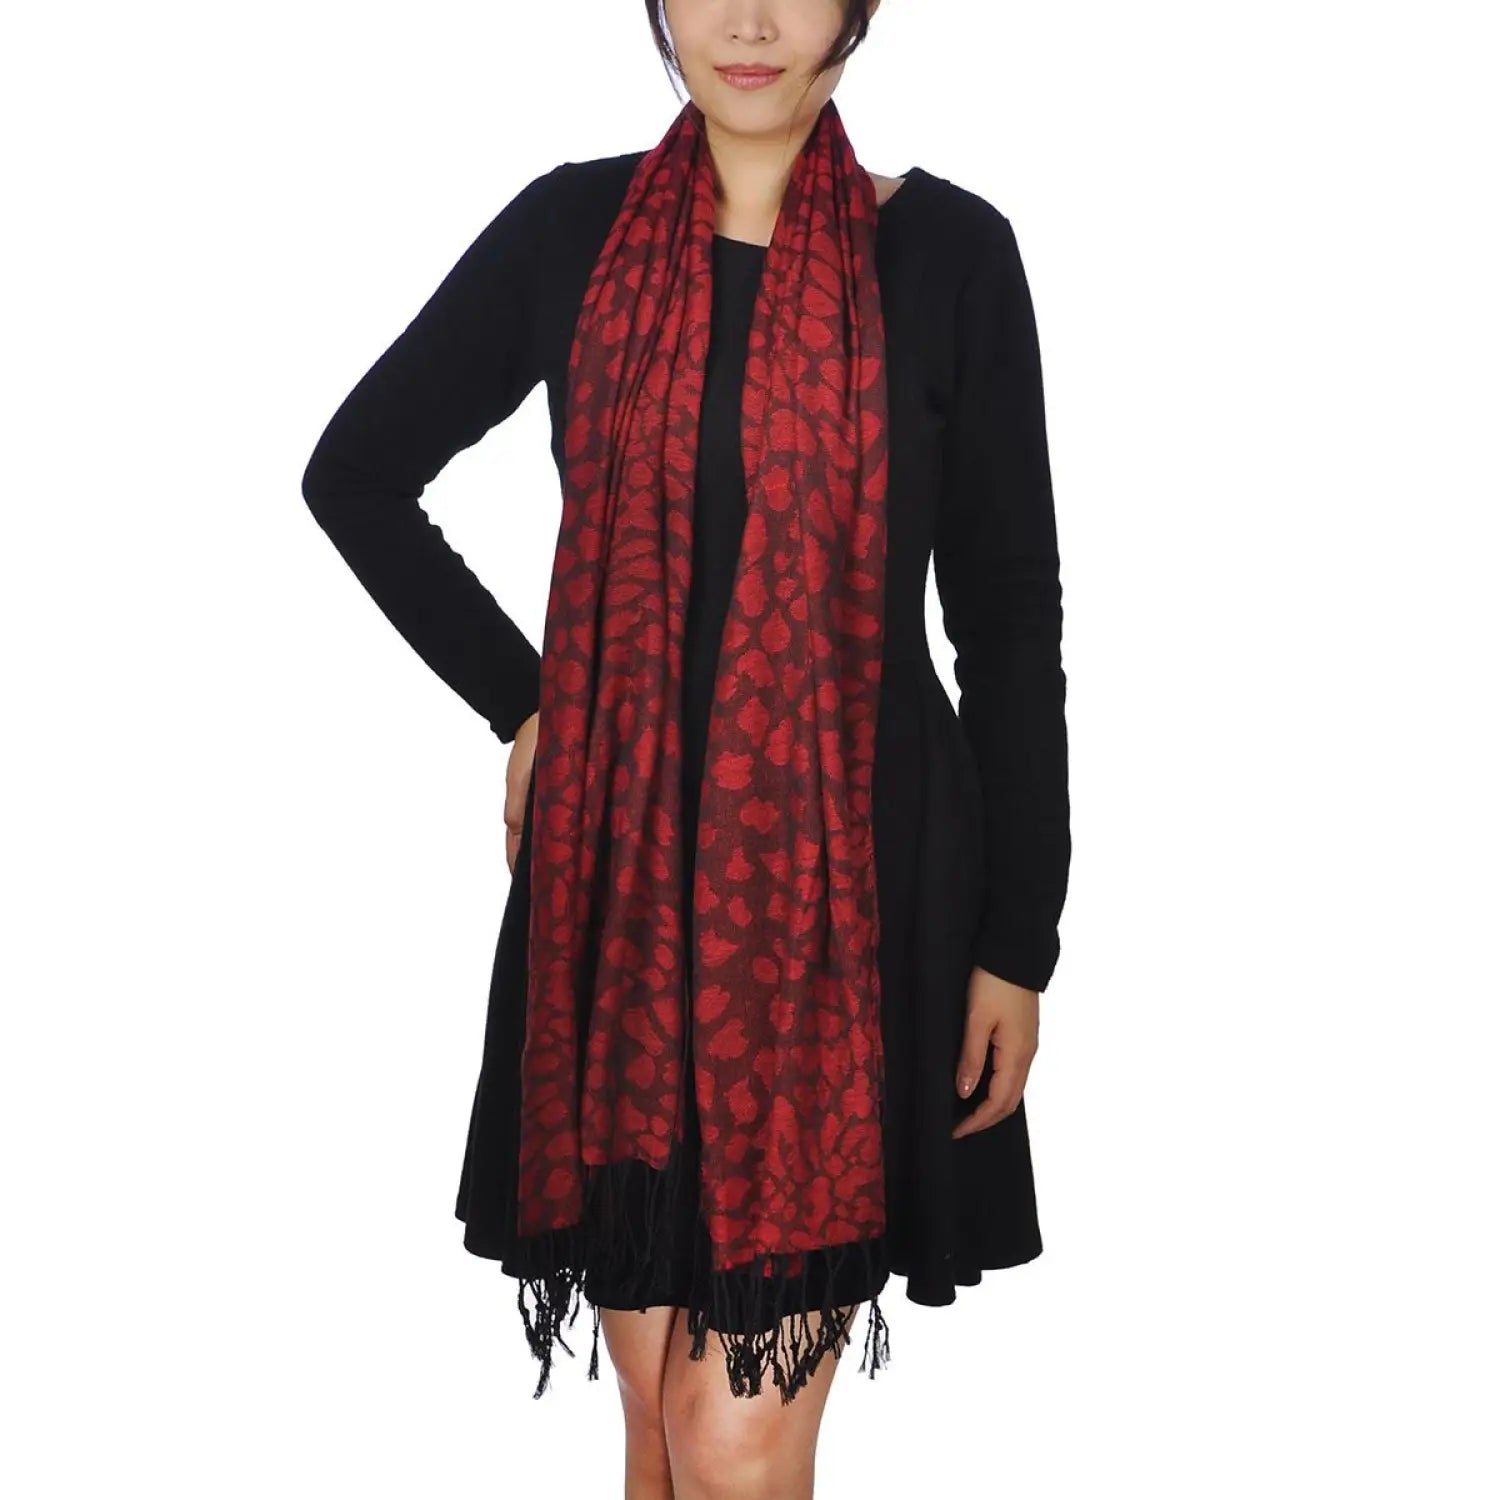 Woman wearing red and black leopard print pashmina scarf